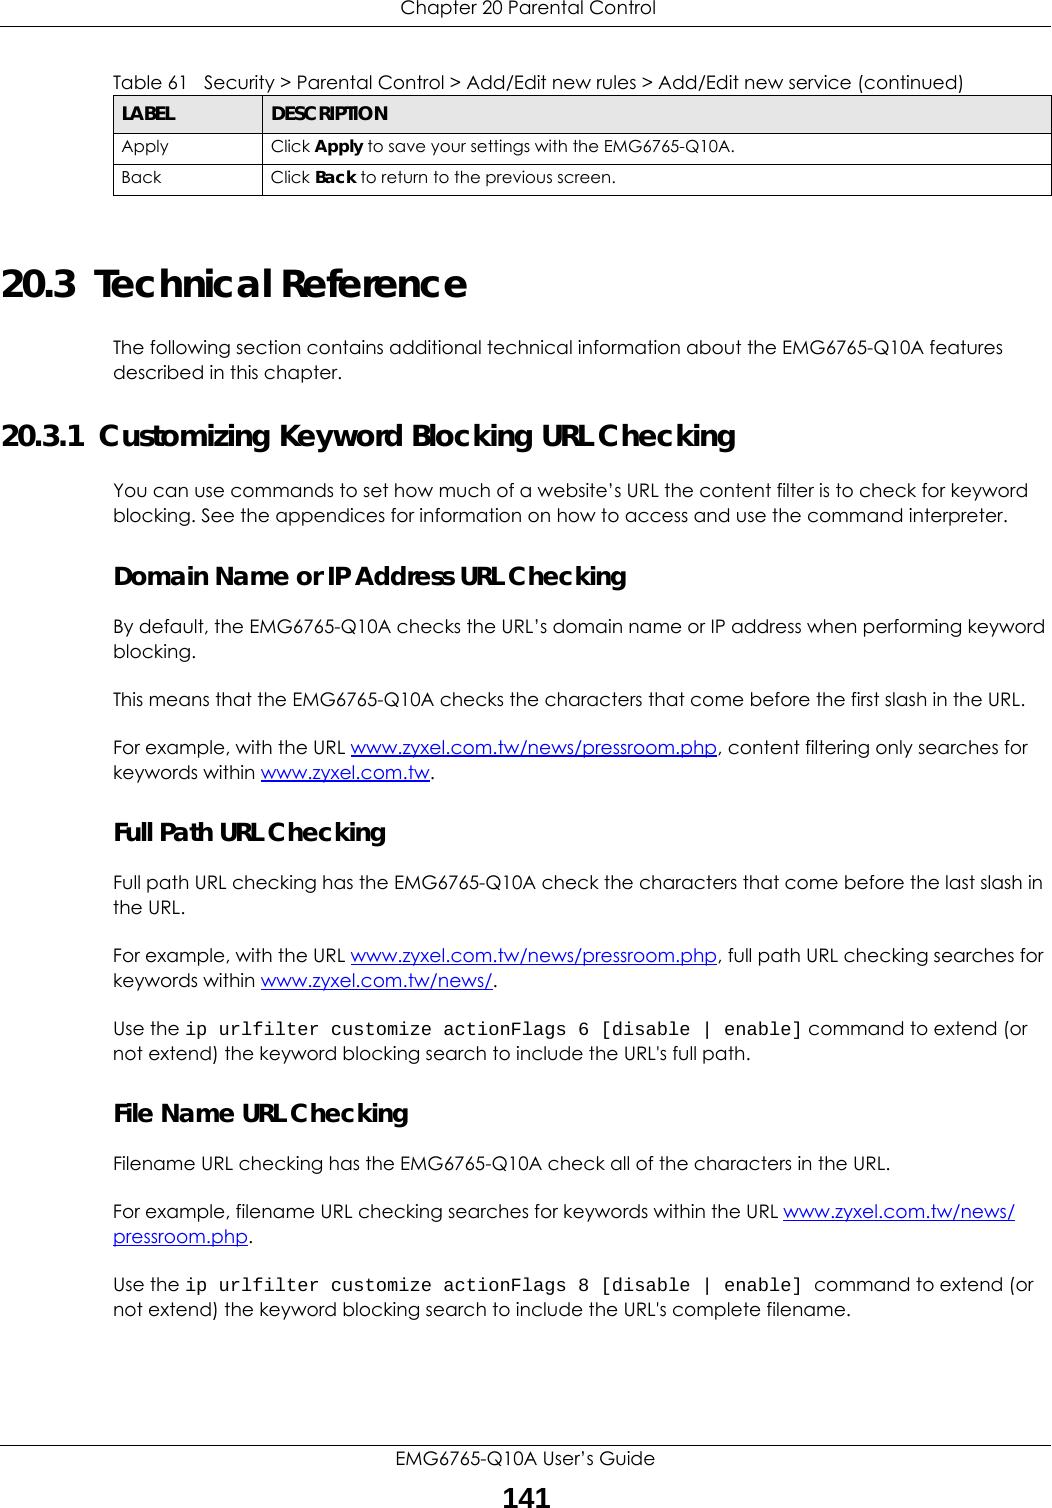  Chapter 20 Parental ControlEMG6765-Q10A User’s Guide14120.3  Technical ReferenceThe following section contains additional technical information about the EMG6765-Q10A features described in this chapter.20.3.1  Customizing Keyword Blocking URL CheckingYou can use commands to set how much of a website’s URL the content filter is to check for keyword blocking. See the appendices for information on how to access and use the command interpreter.Domain Name or IP Address URL CheckingBy default, the EMG6765-Q10A checks the URL’s domain name or IP address when performing keyword blocking.This means that the EMG6765-Q10A checks the characters that come before the first slash in the URL.For example, with the URL www.zyxel.com.tw/news/pressroom.php, content filtering only searches for keywords within www.zyxel.com.tw.Full Path URL CheckingFull path URL checking has the EMG6765-Q10A check the characters that come before the last slash in the URL.For example, with the URL www.zyxel.com.tw/news/pressroom.php, full path URL checking searches for keywords within www.zyxel.com.tw/news/.Use the ip urlfilter customize actionFlags 6 [disable | enable] command to extend (or not extend) the keyword blocking search to include the URL&apos;s full path.File Name URL CheckingFilename URL checking has the EMG6765-Q10A check all of the characters in the URL.For example, filename URL checking searches for keywords within the URL www.zyxel.com.tw/news/pressroom.php.Use the ip urlfilter customize actionFlags 8 [disable | enable] command to extend (or not extend) the keyword blocking search to include the URL&apos;s complete filename.Apply Click Apply to save your settings with the EMG6765-Q10A.Back Click Back to return to the previous screen.Table 61   Security &gt; Parental Control &gt; Add/Edit new rules &gt; Add/Edit new service (continued)LABEL DESCRIPTION